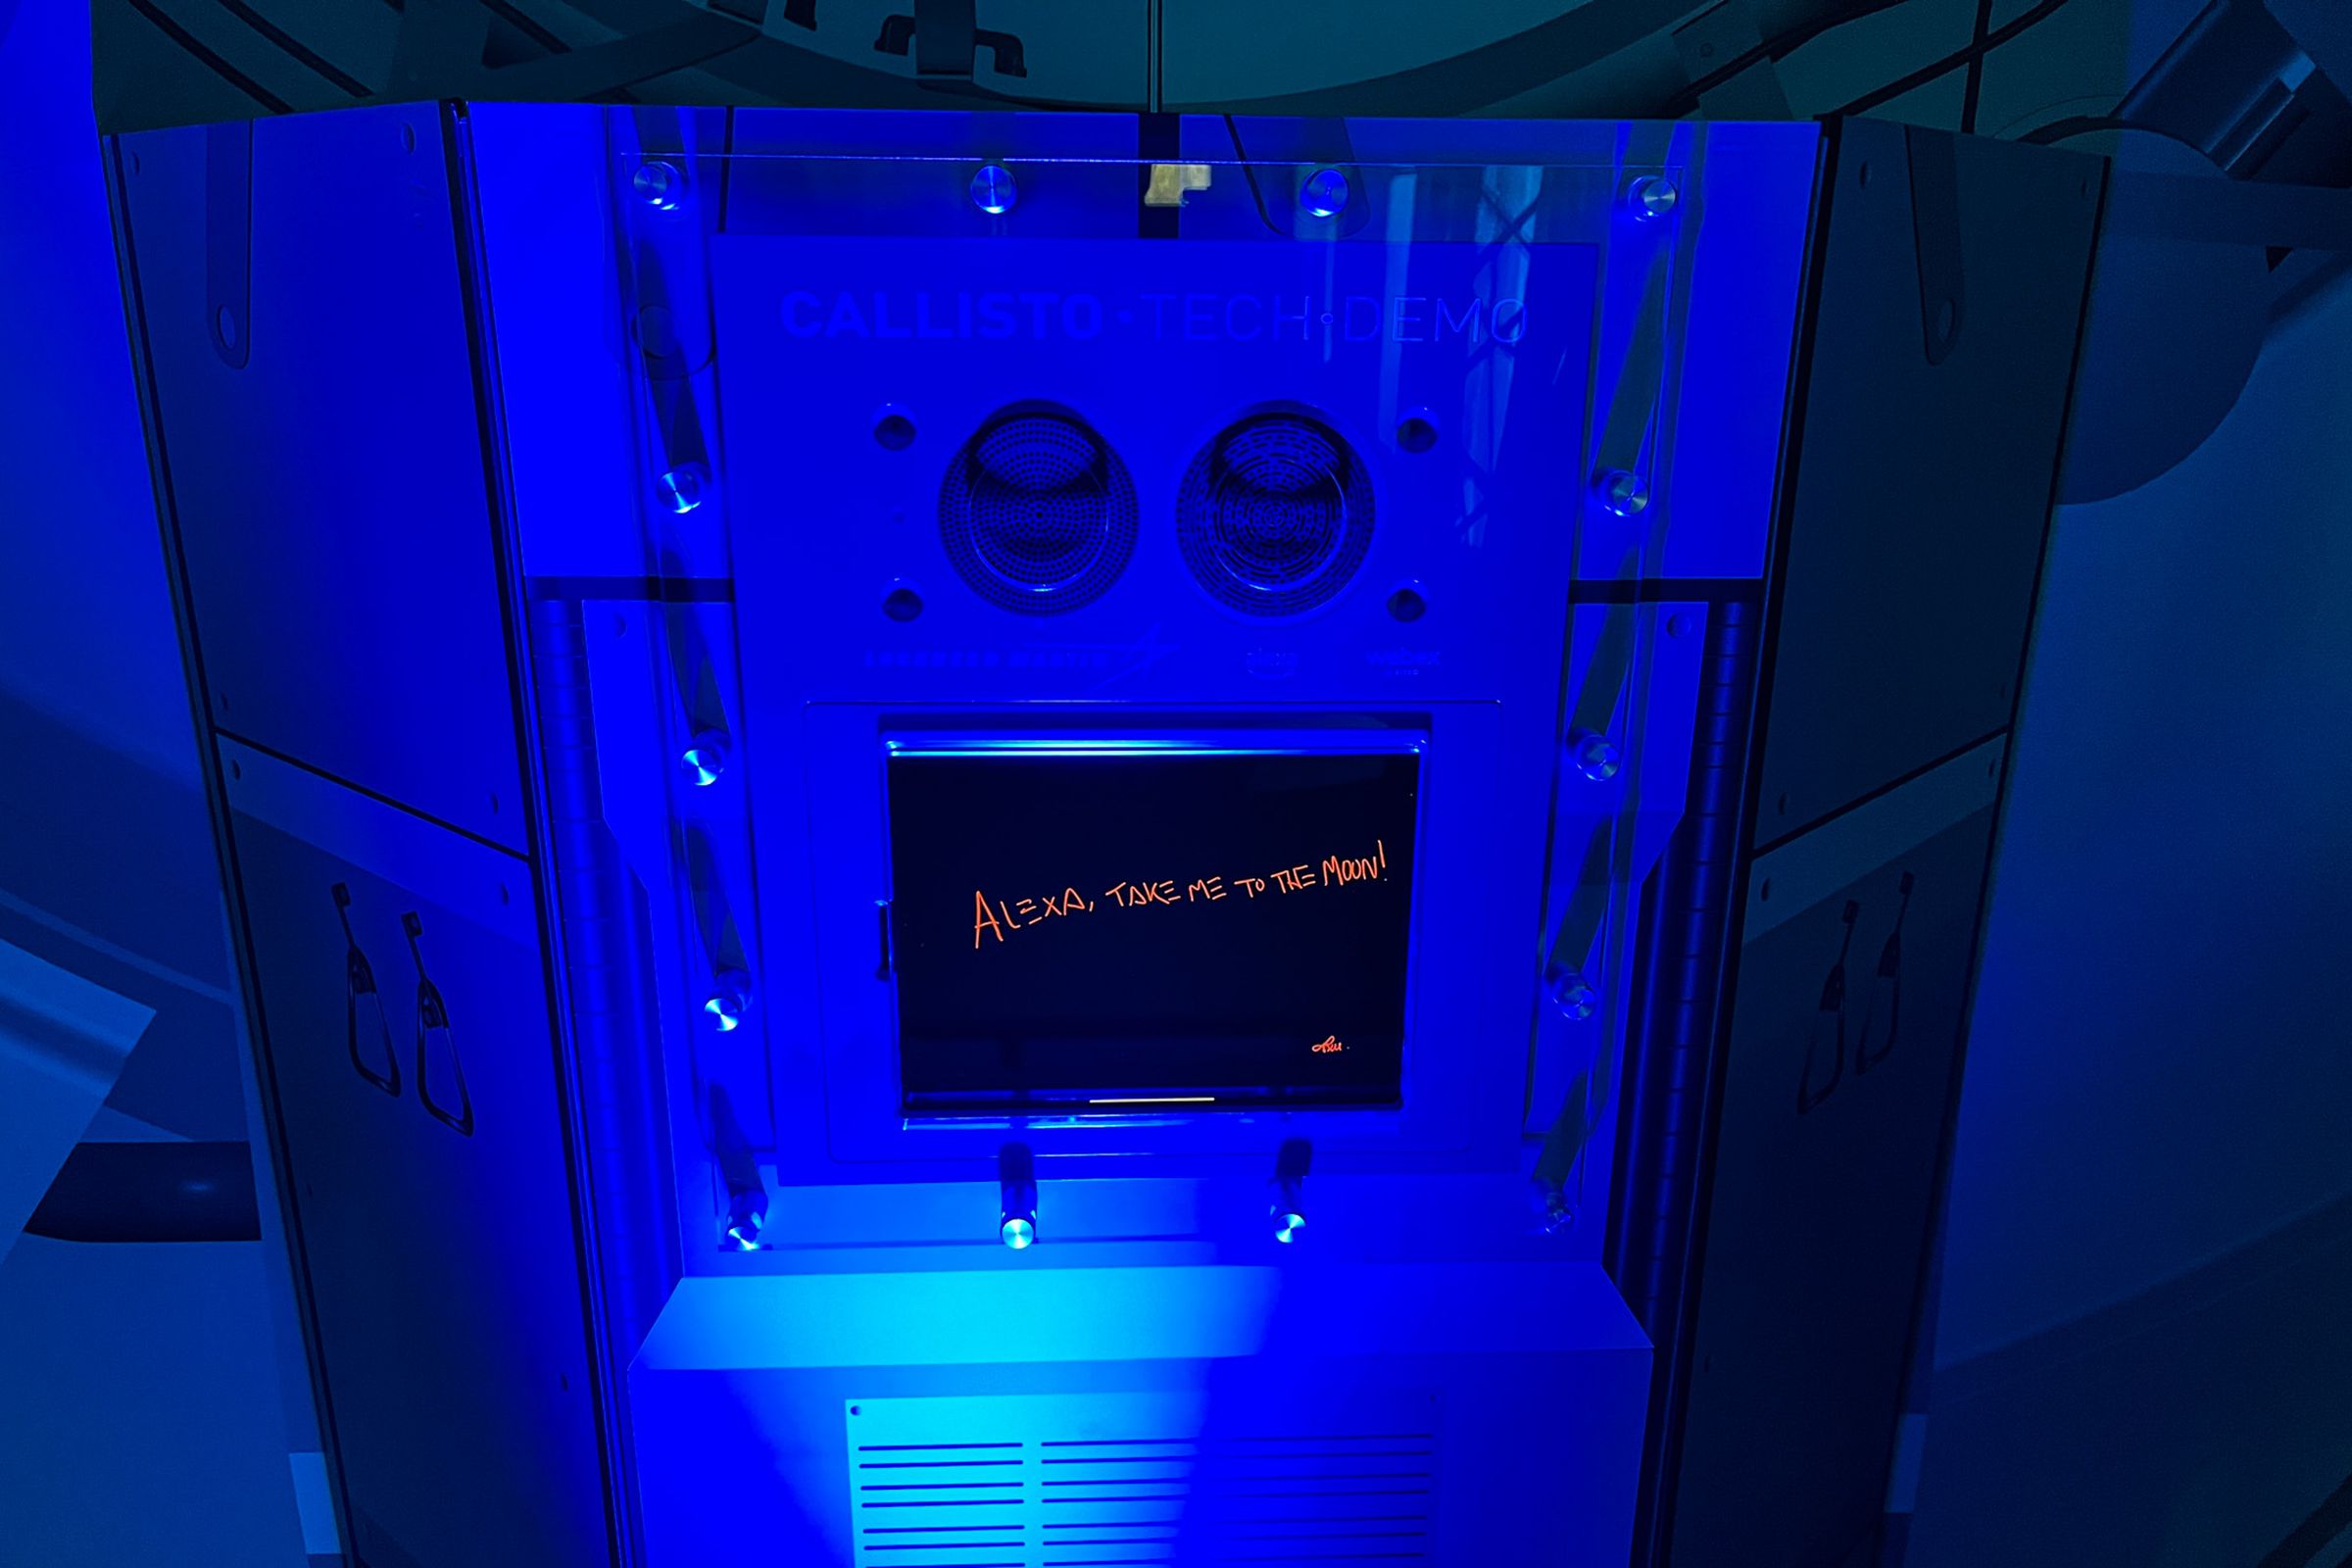 A demo version of the Callisto technology payload on the Orion. The device includes Amazon’s Alexa voice assistant and an iPad running Webex.